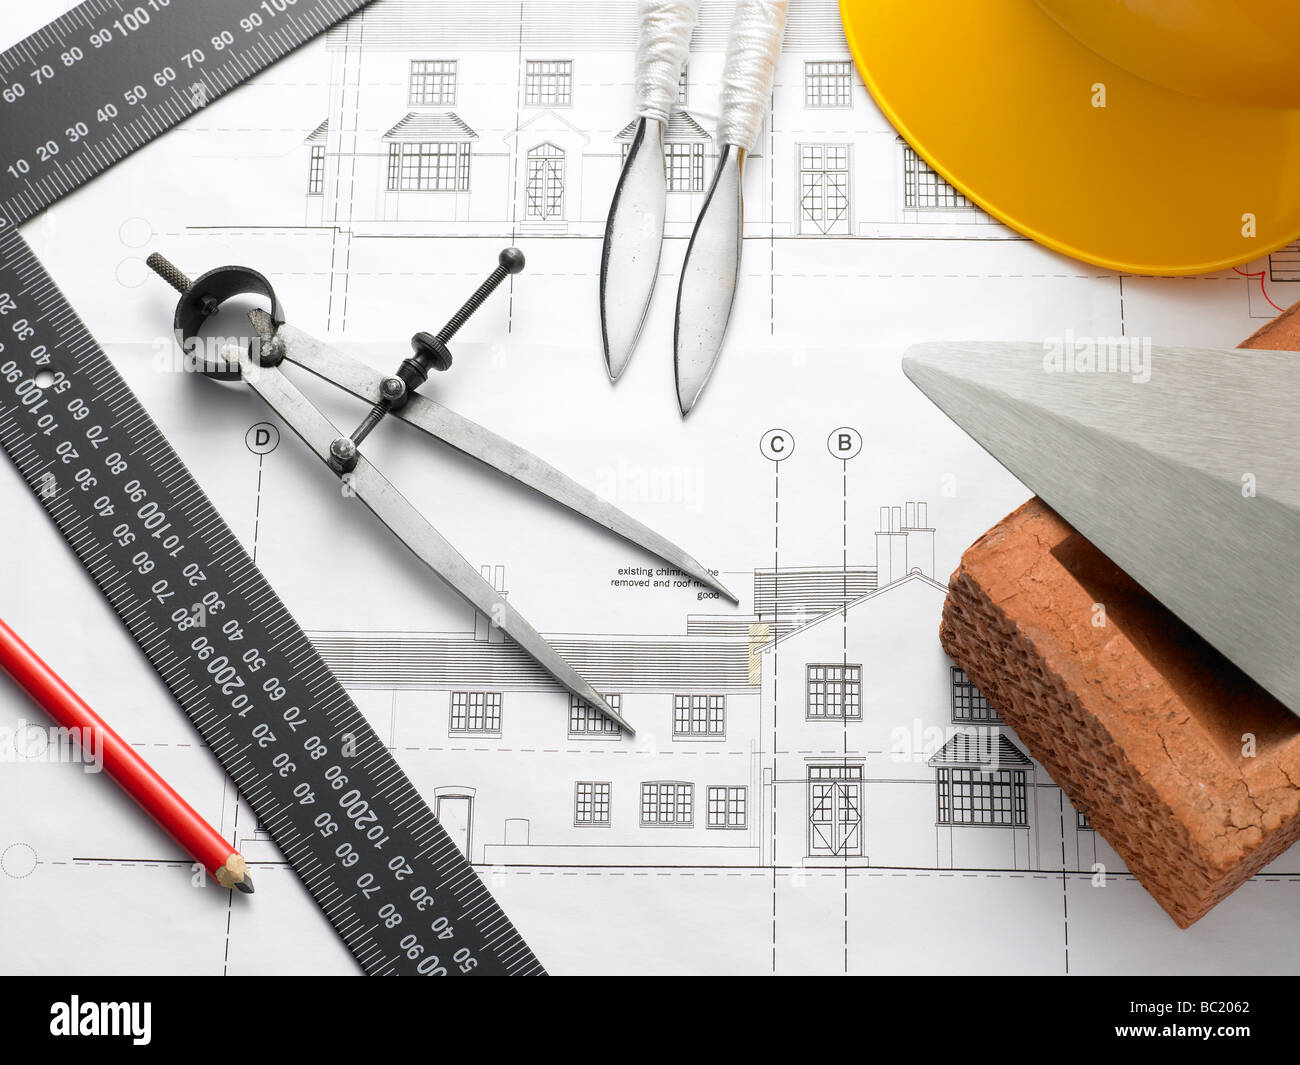 Building Equipment On House Plans Stock Photo